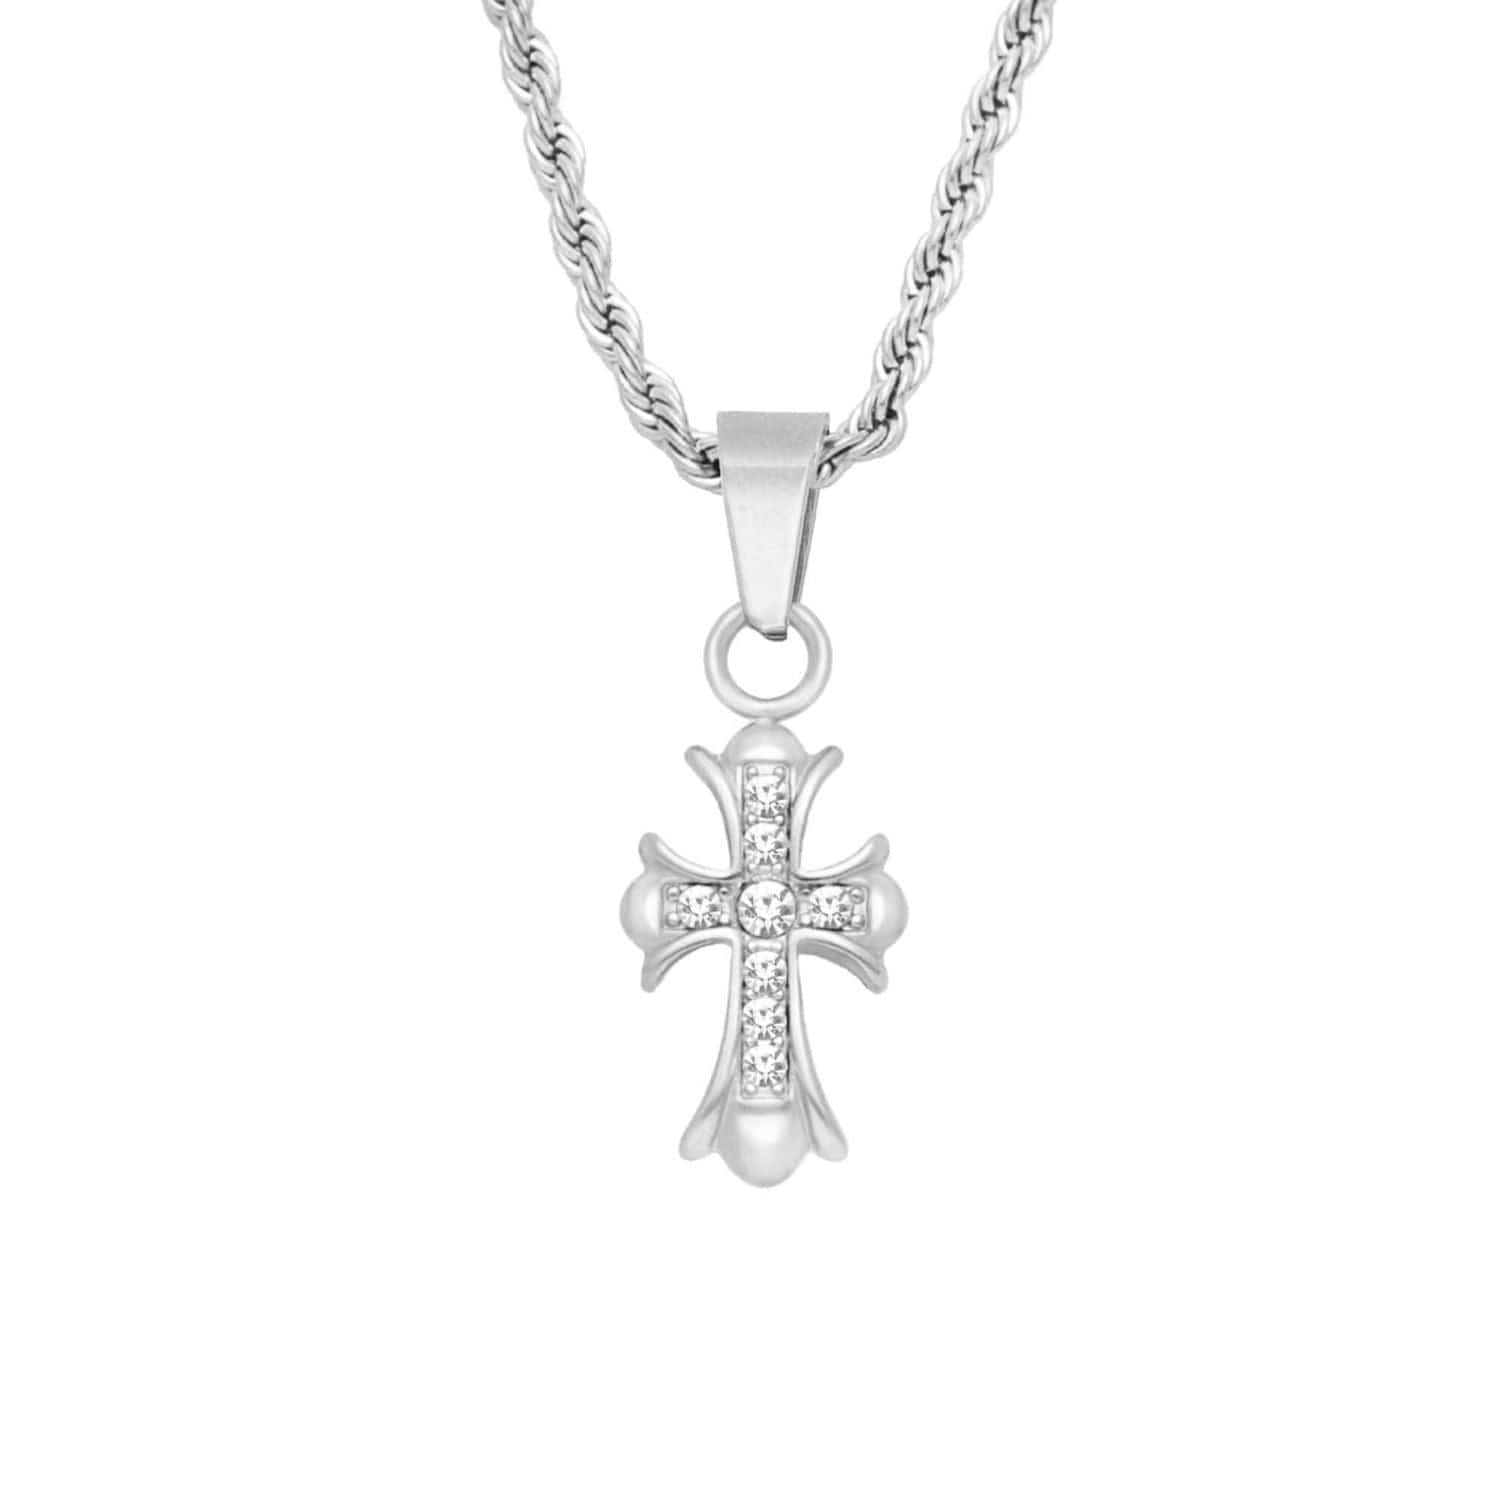 BohoMoon Stainless Steel Lillie Cross Necklace Silver